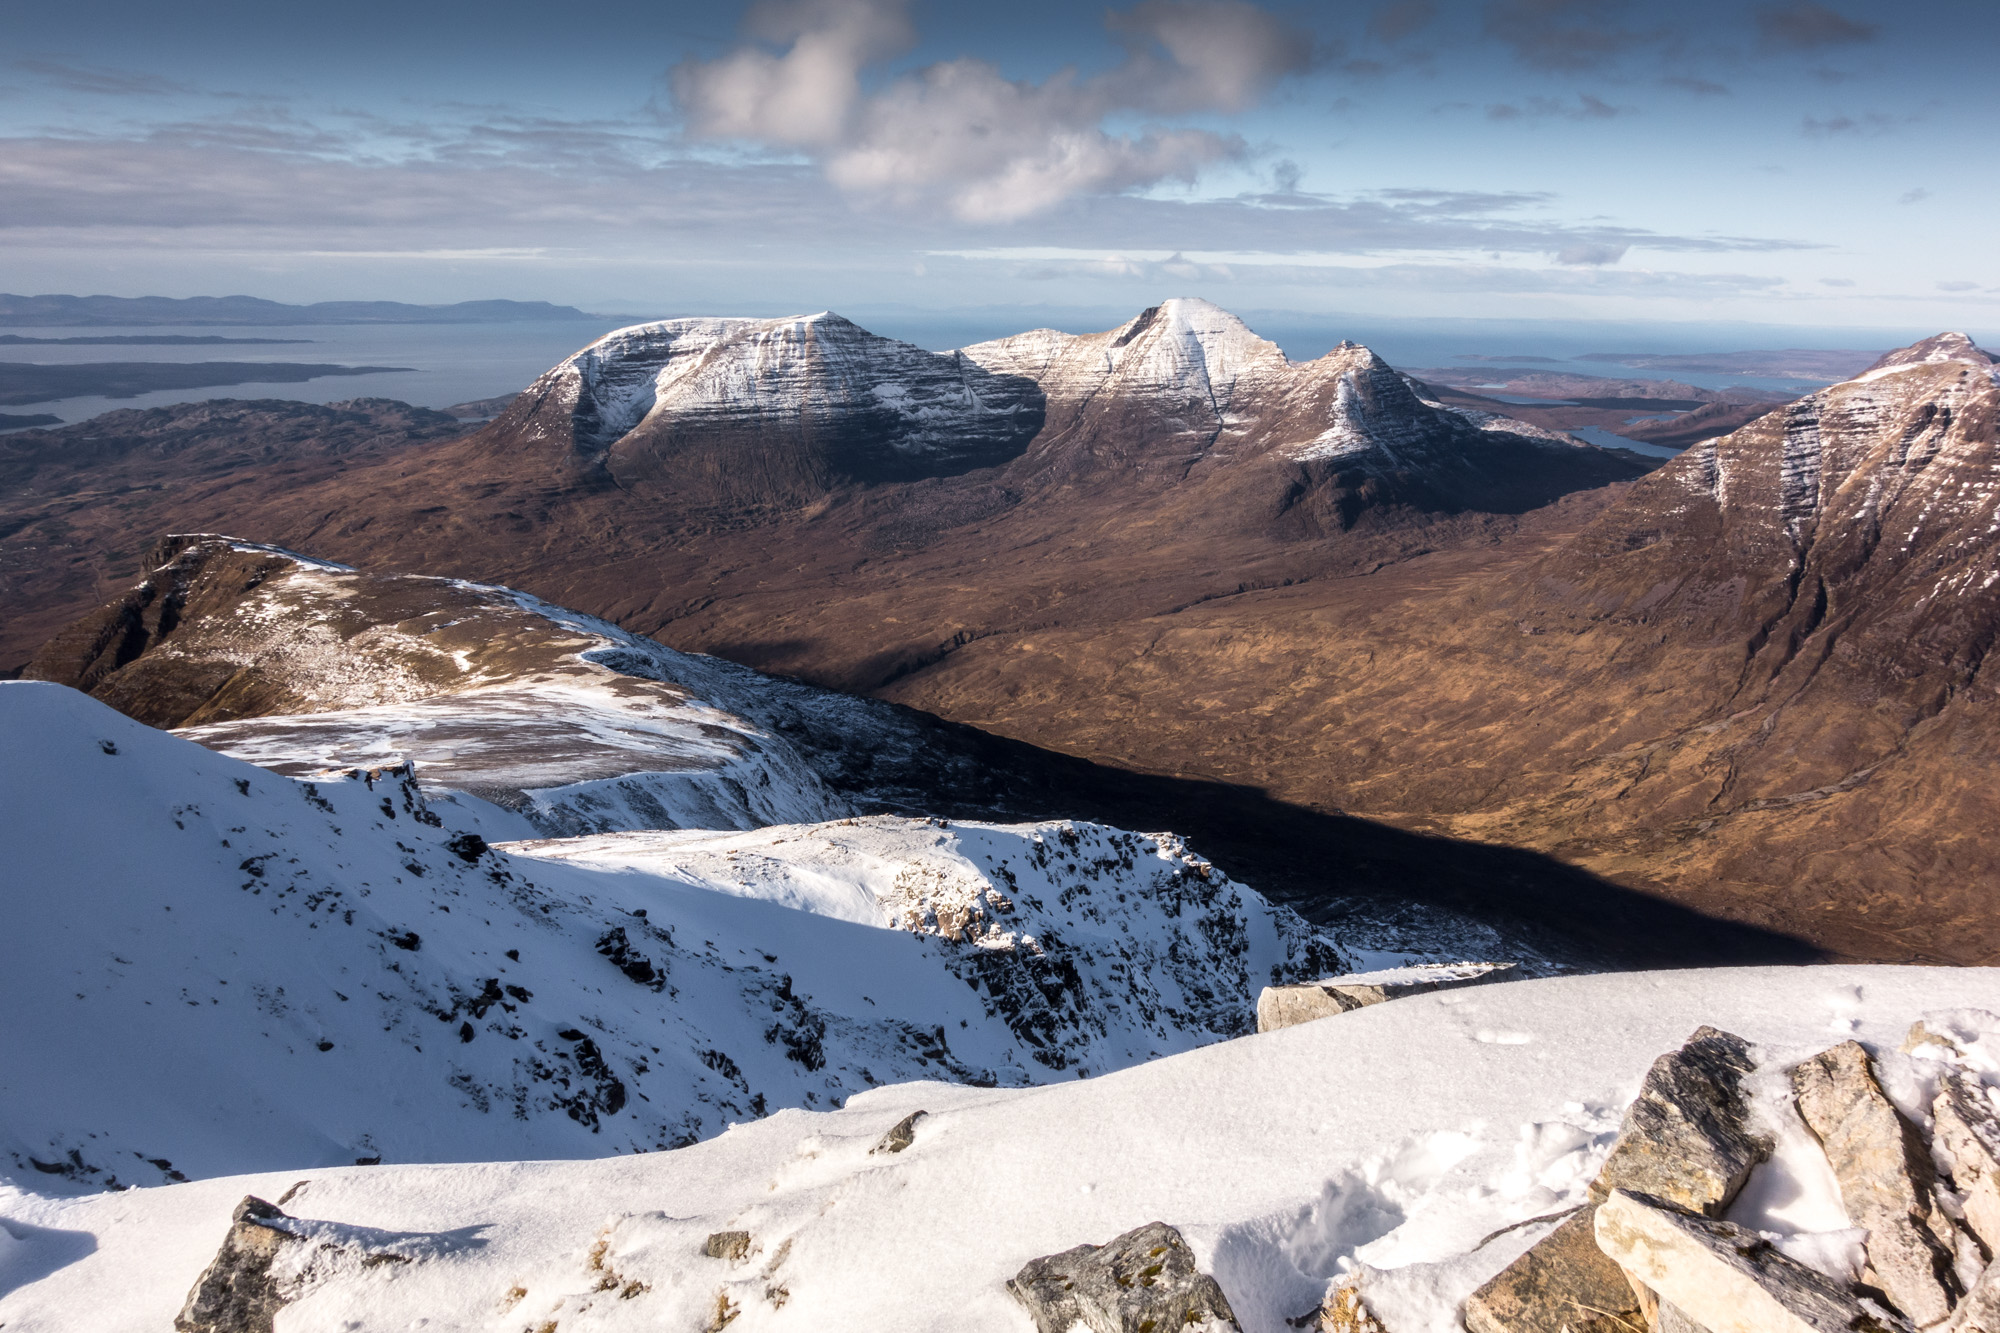 West out to Beinn Alligin, Skye and the Outer Hebrides from the summit of Mullach an Rathain